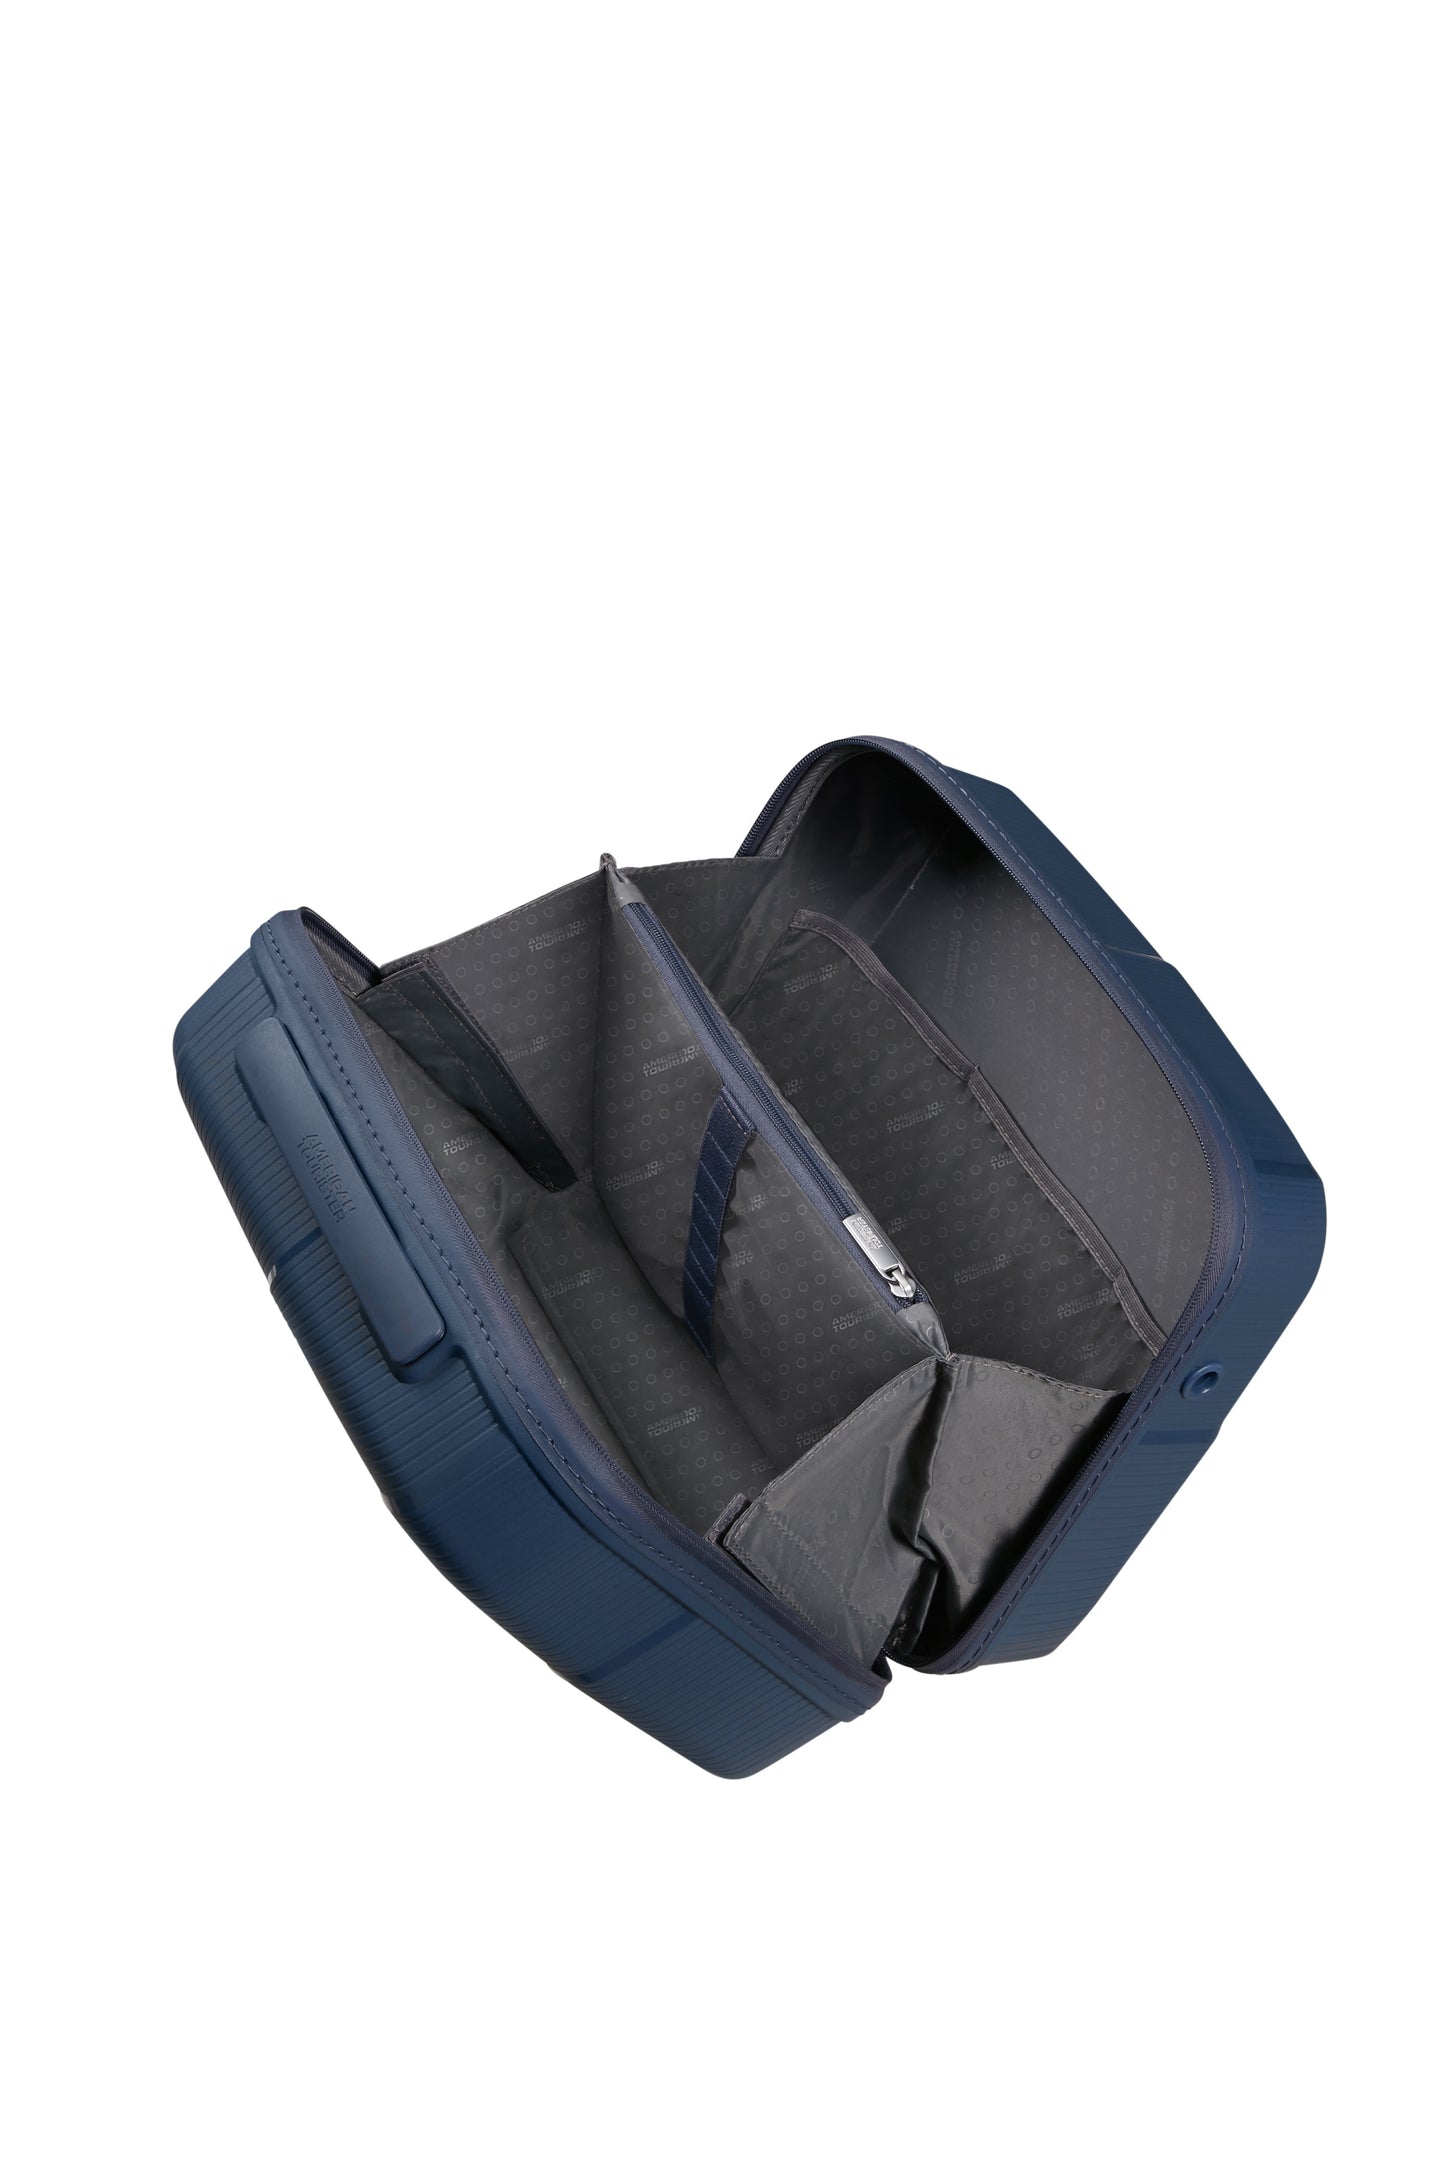 American Tourister STARVIBE  beauty case  navy